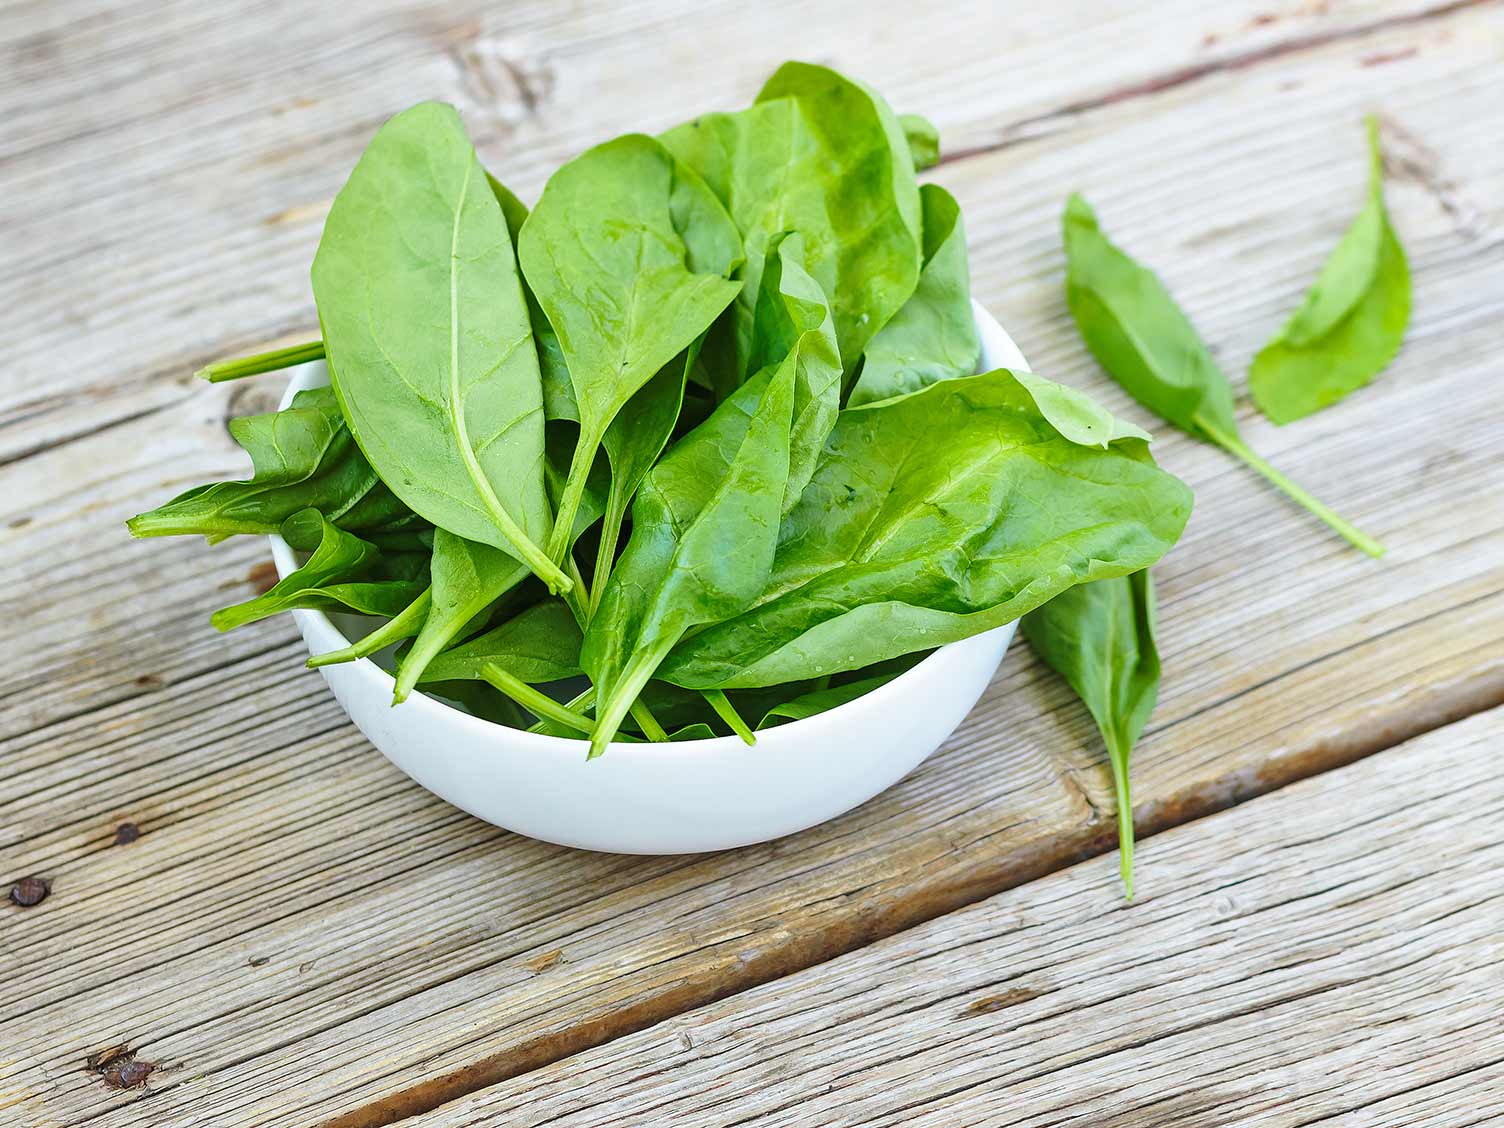 Fresh spinach leaves